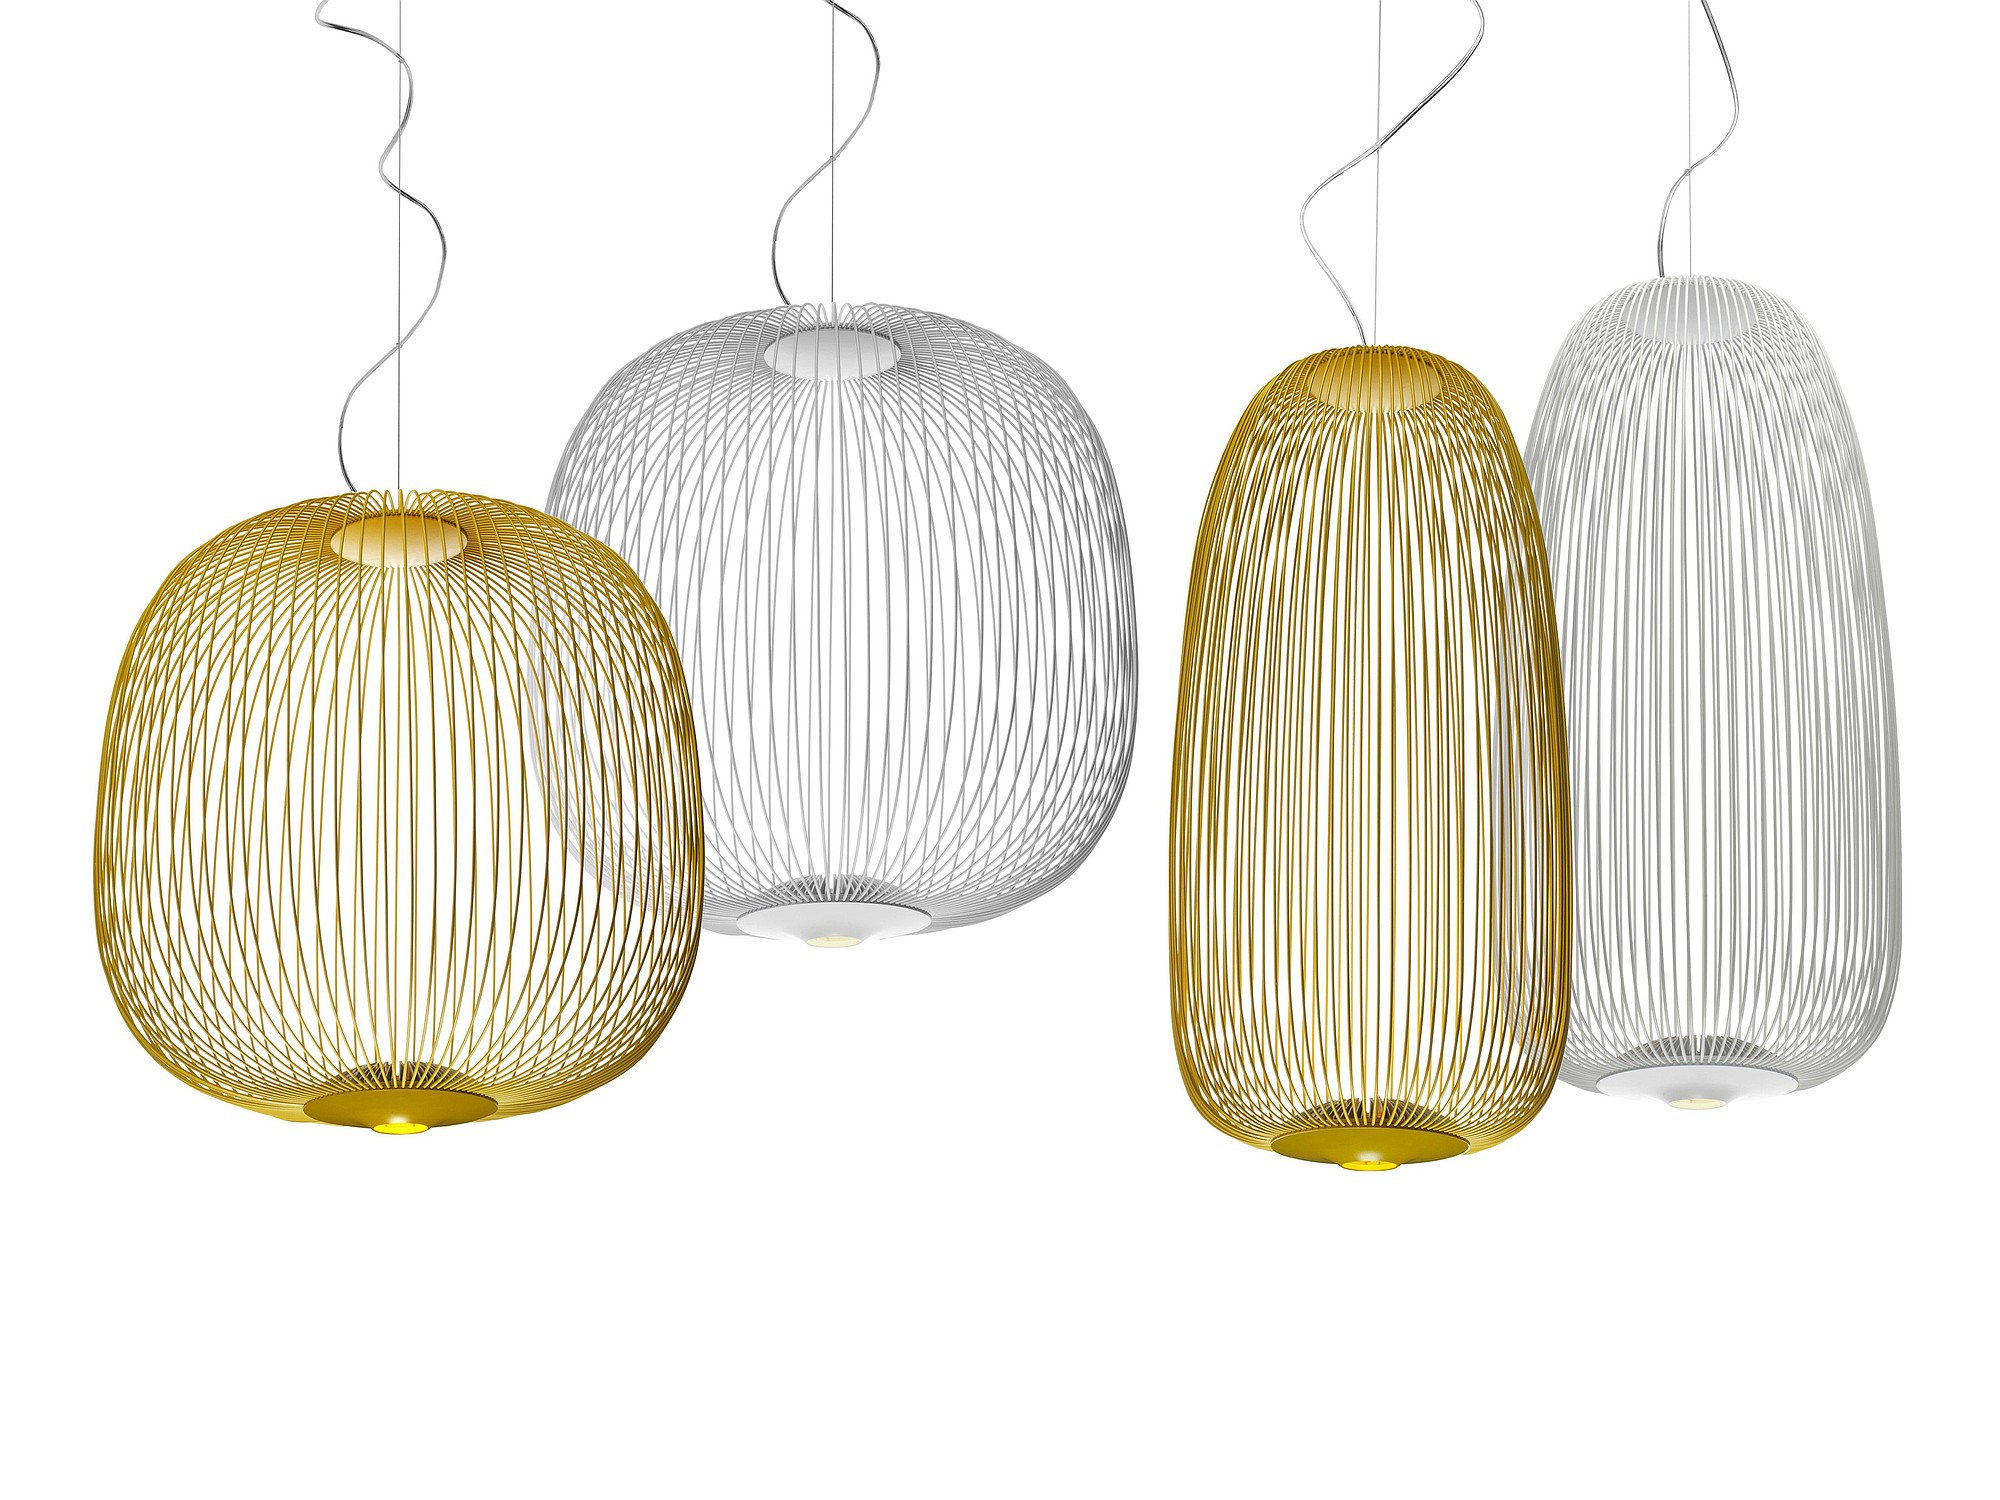 Foscarini's Spokes lamps come in two shapes and two colors (white and mustard).